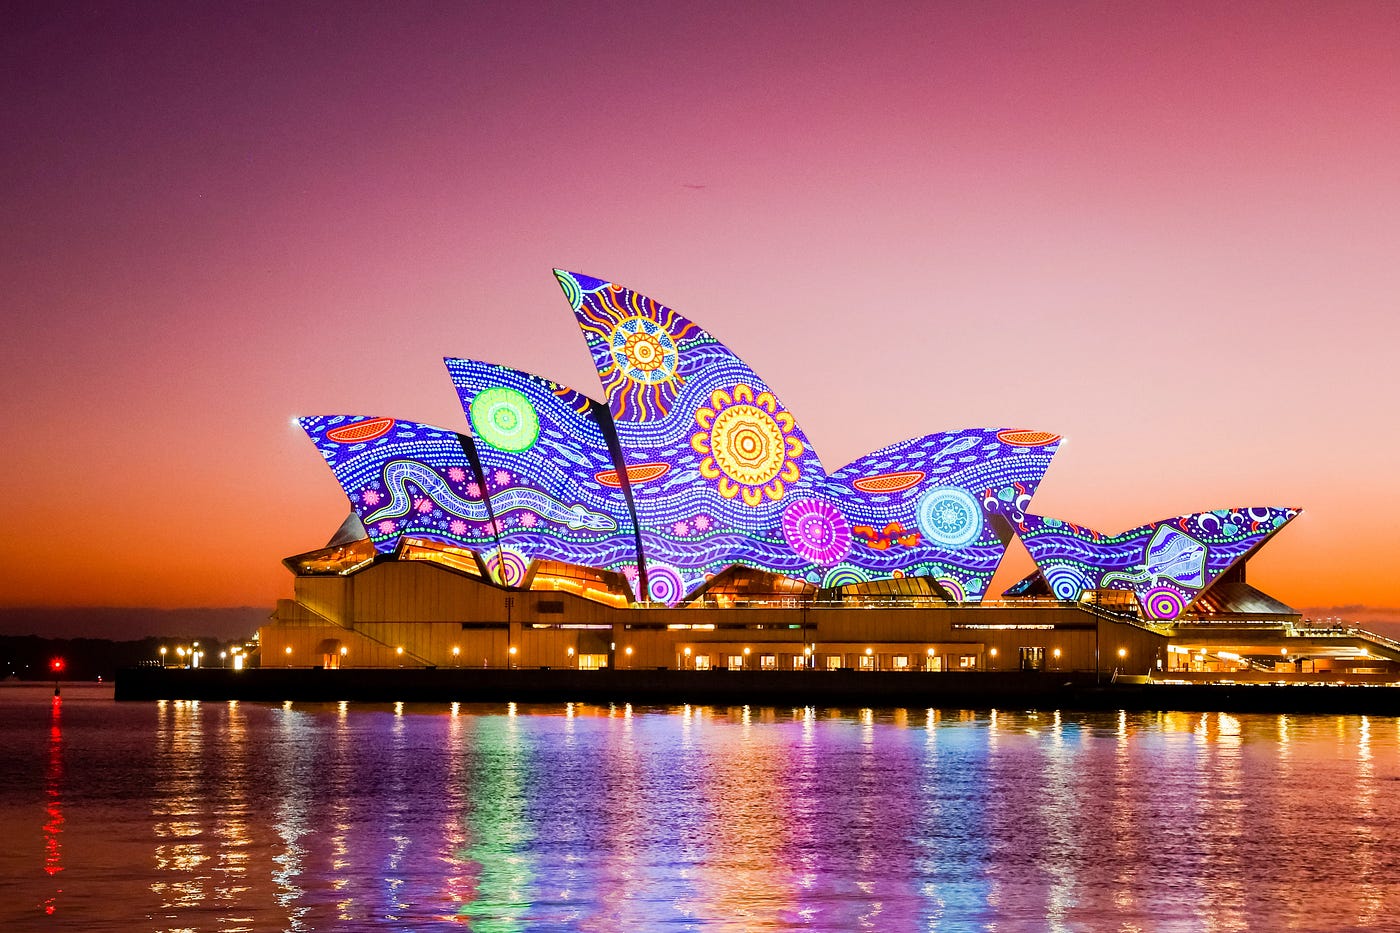 Sydney Icons: Exploring Australia's Most Populous City with the Famous Opera House